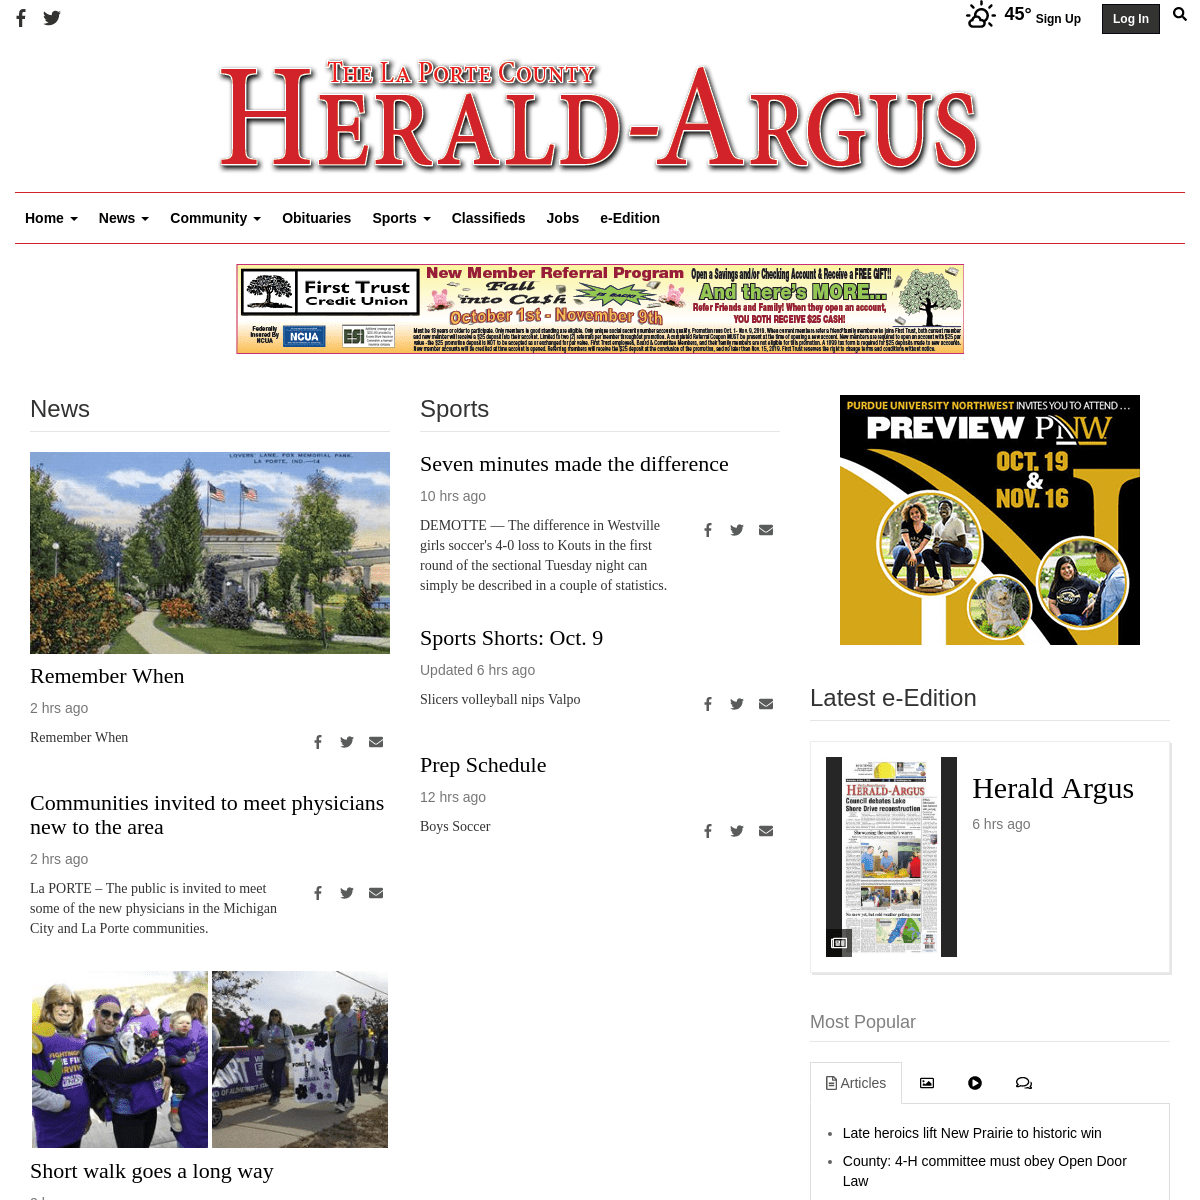 A complete backup of heraldargus.com